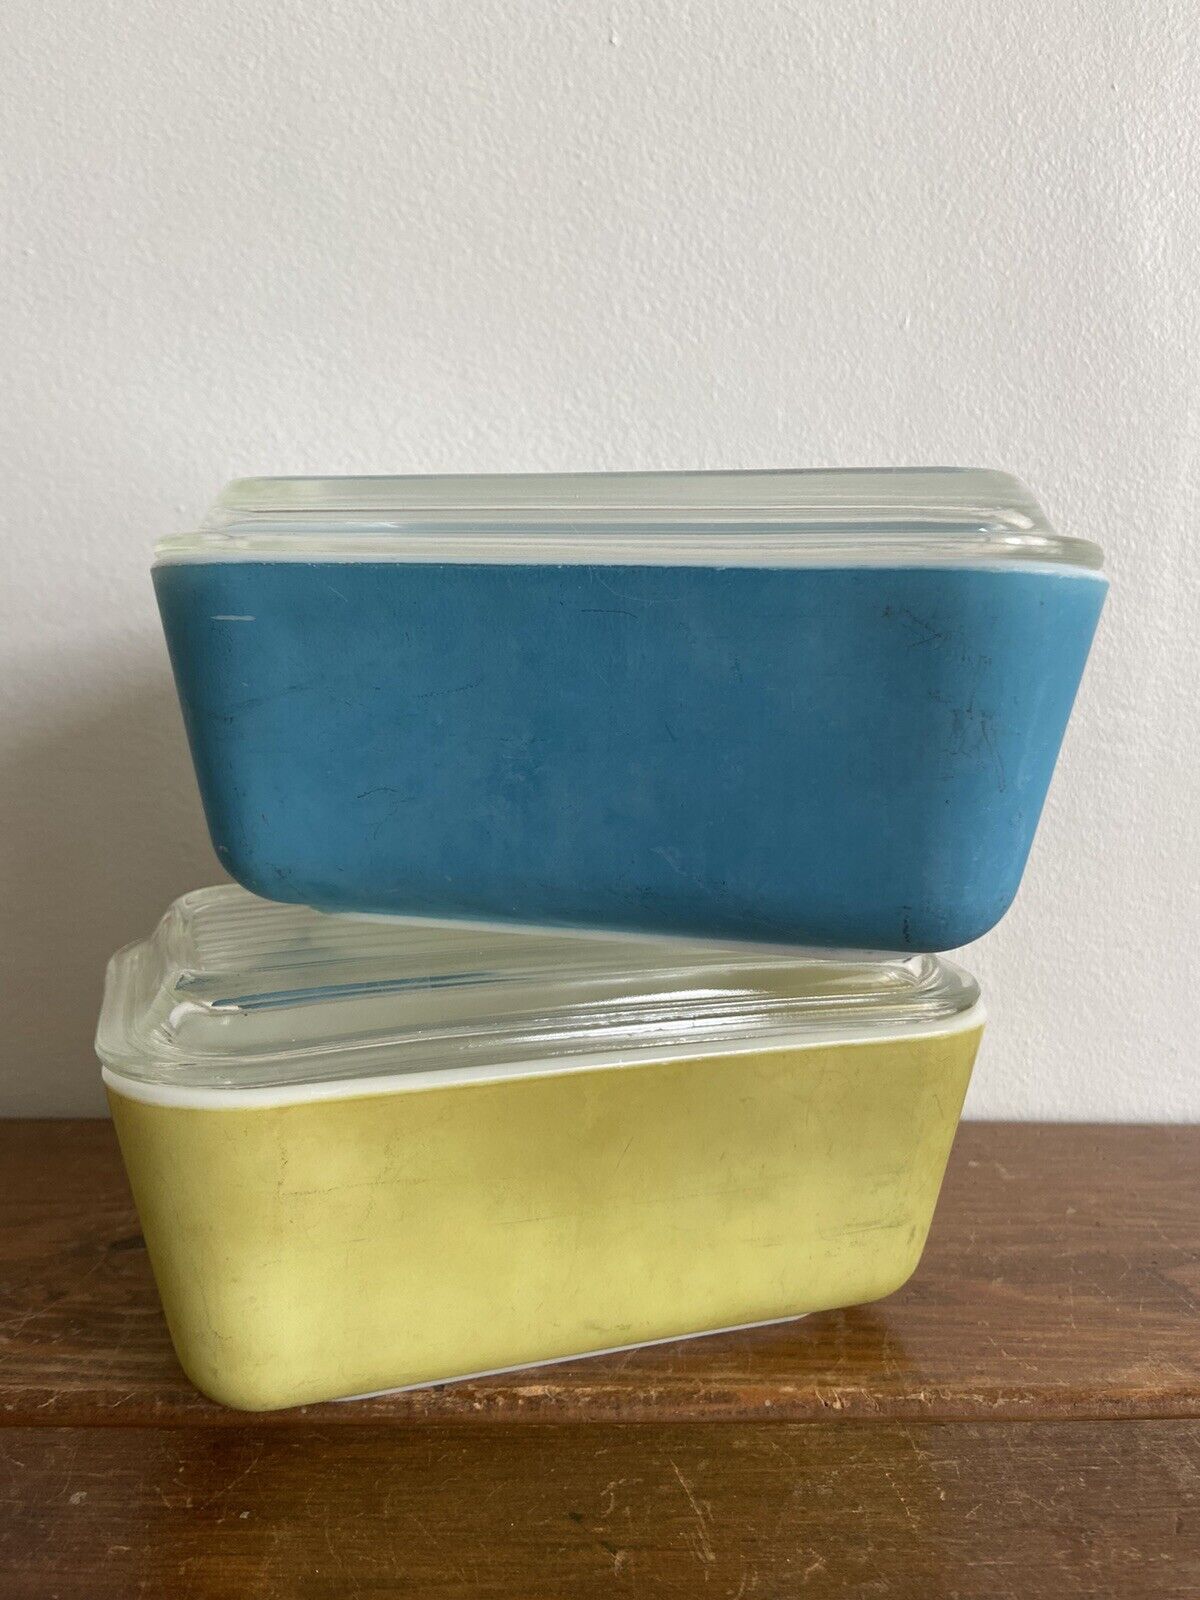 2 Vintage Pyrex 0502 Refrigerator Dishes ~ 1 1/2 Pint 1 Green 1 Blue with Lids